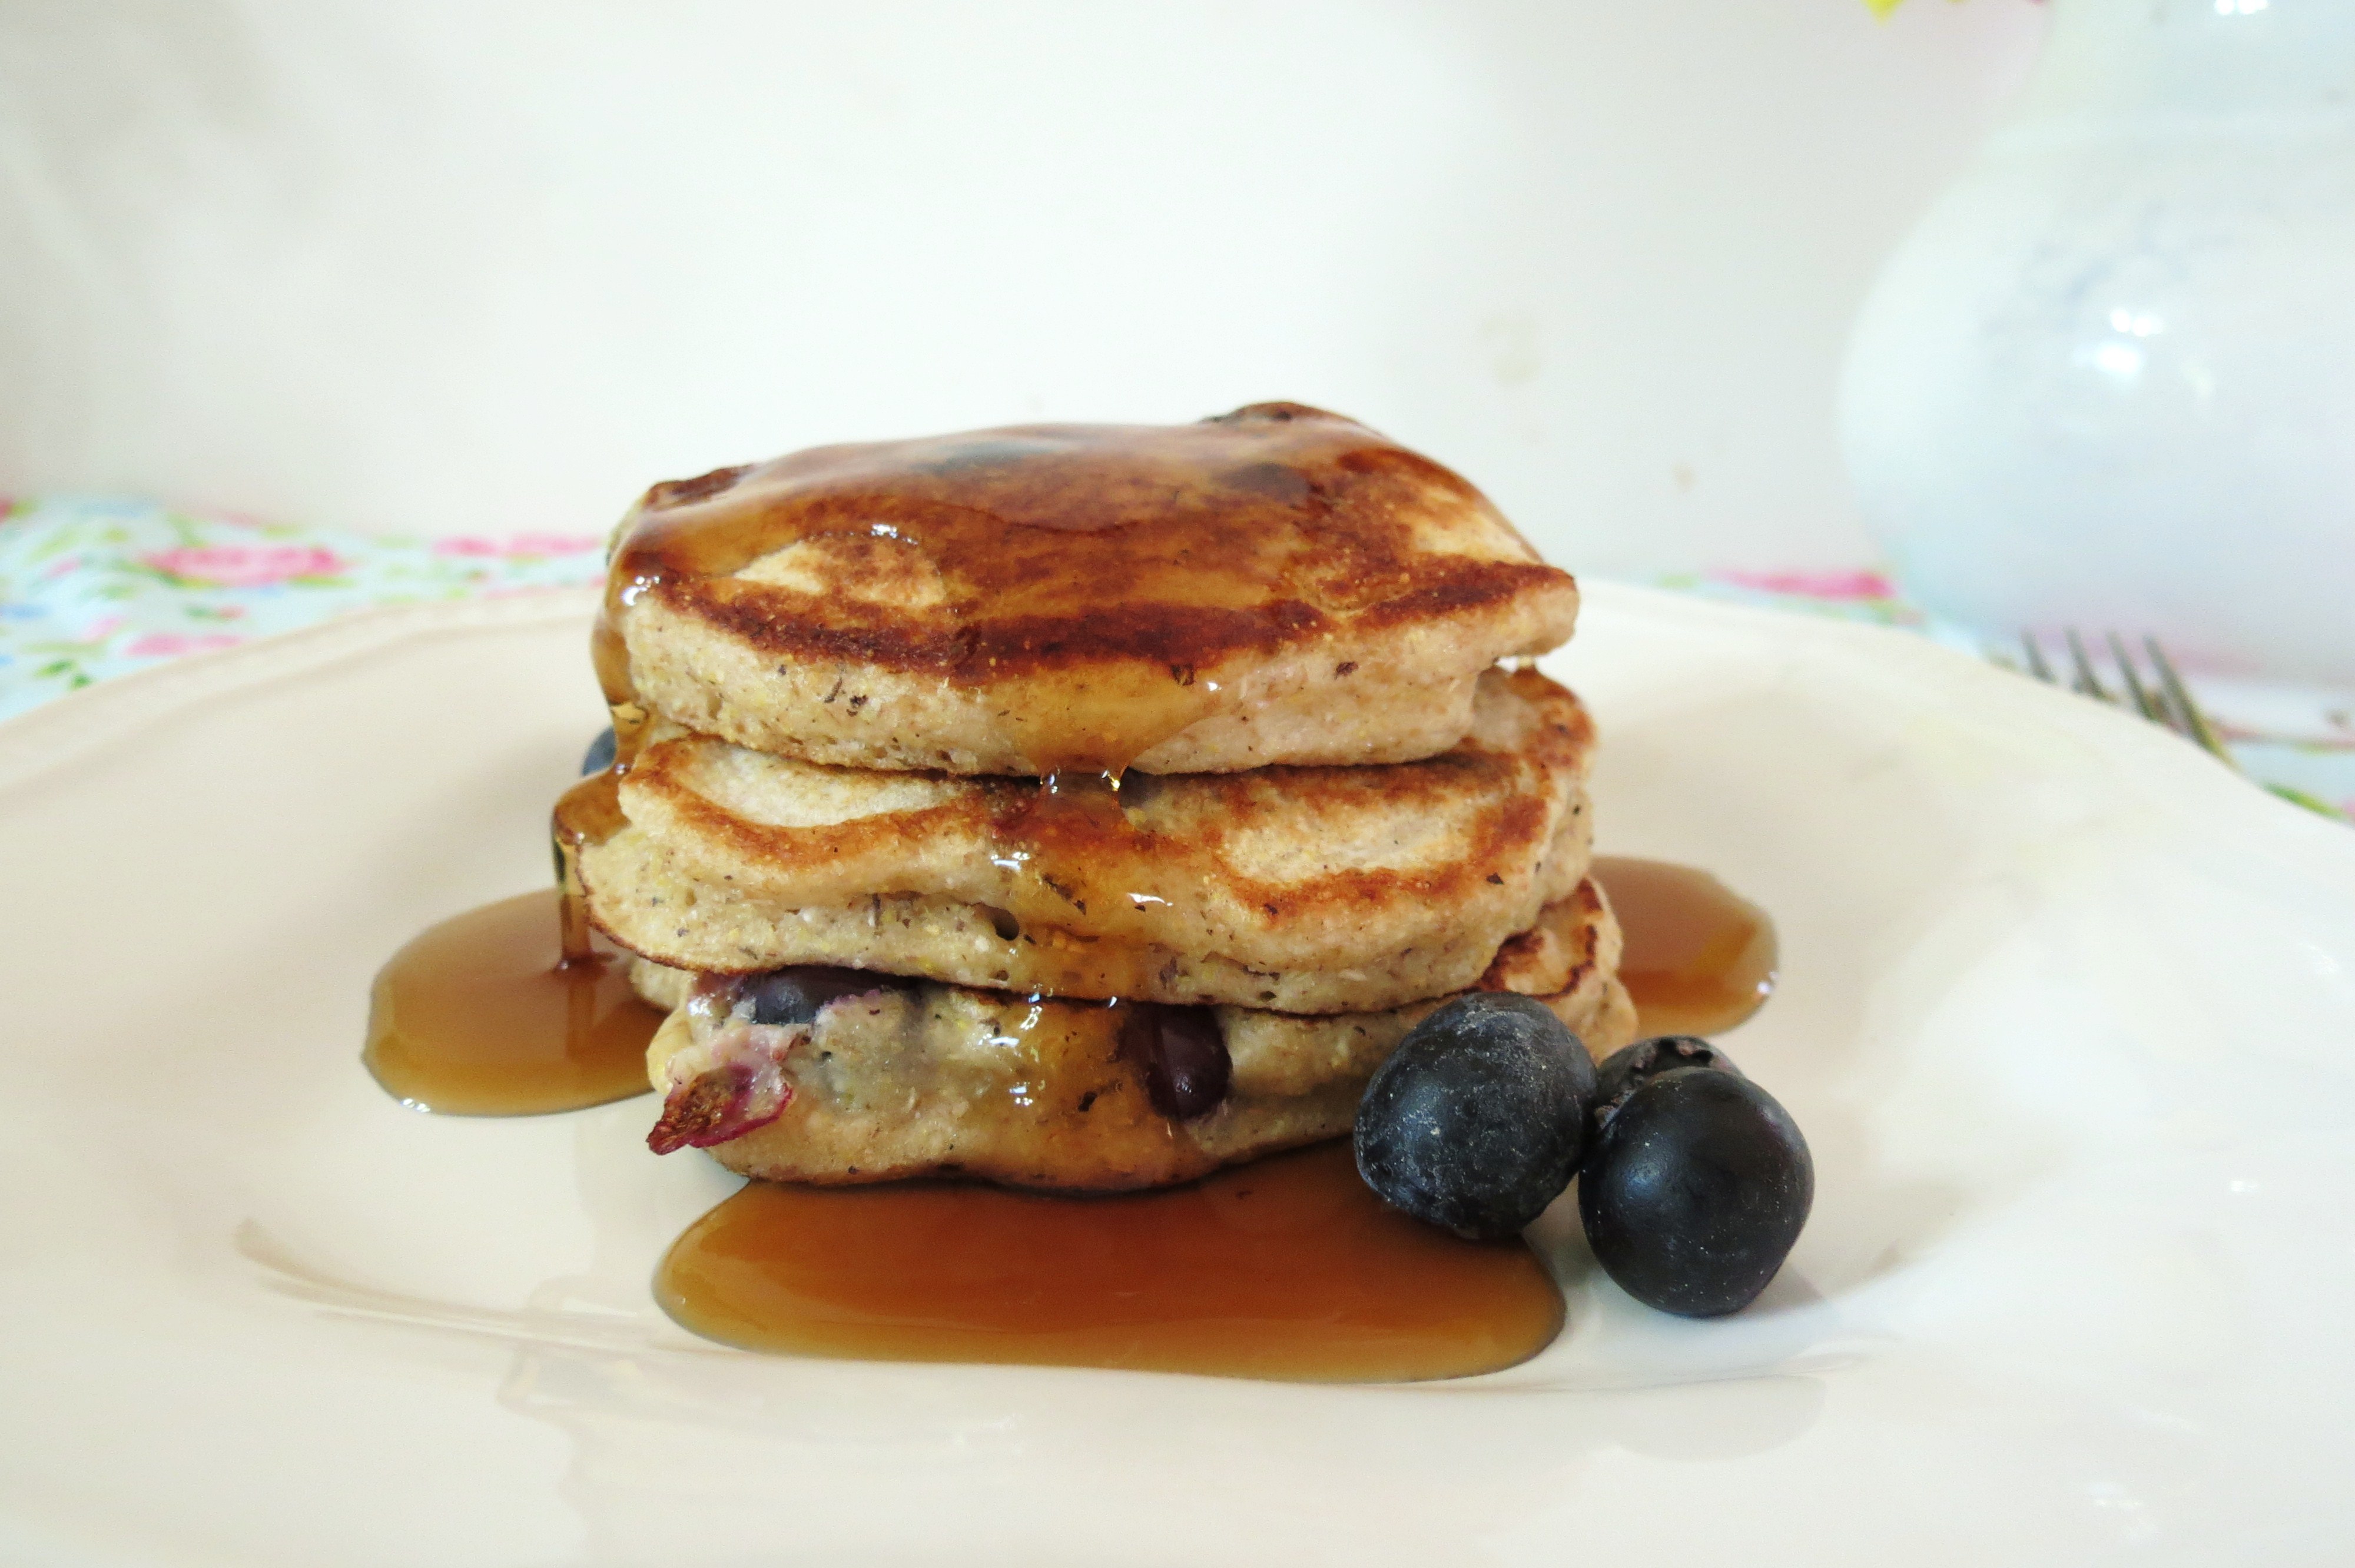 Cancel blueberry how Feel with a reply pancake pancakes free comment leave make  :) to to mix